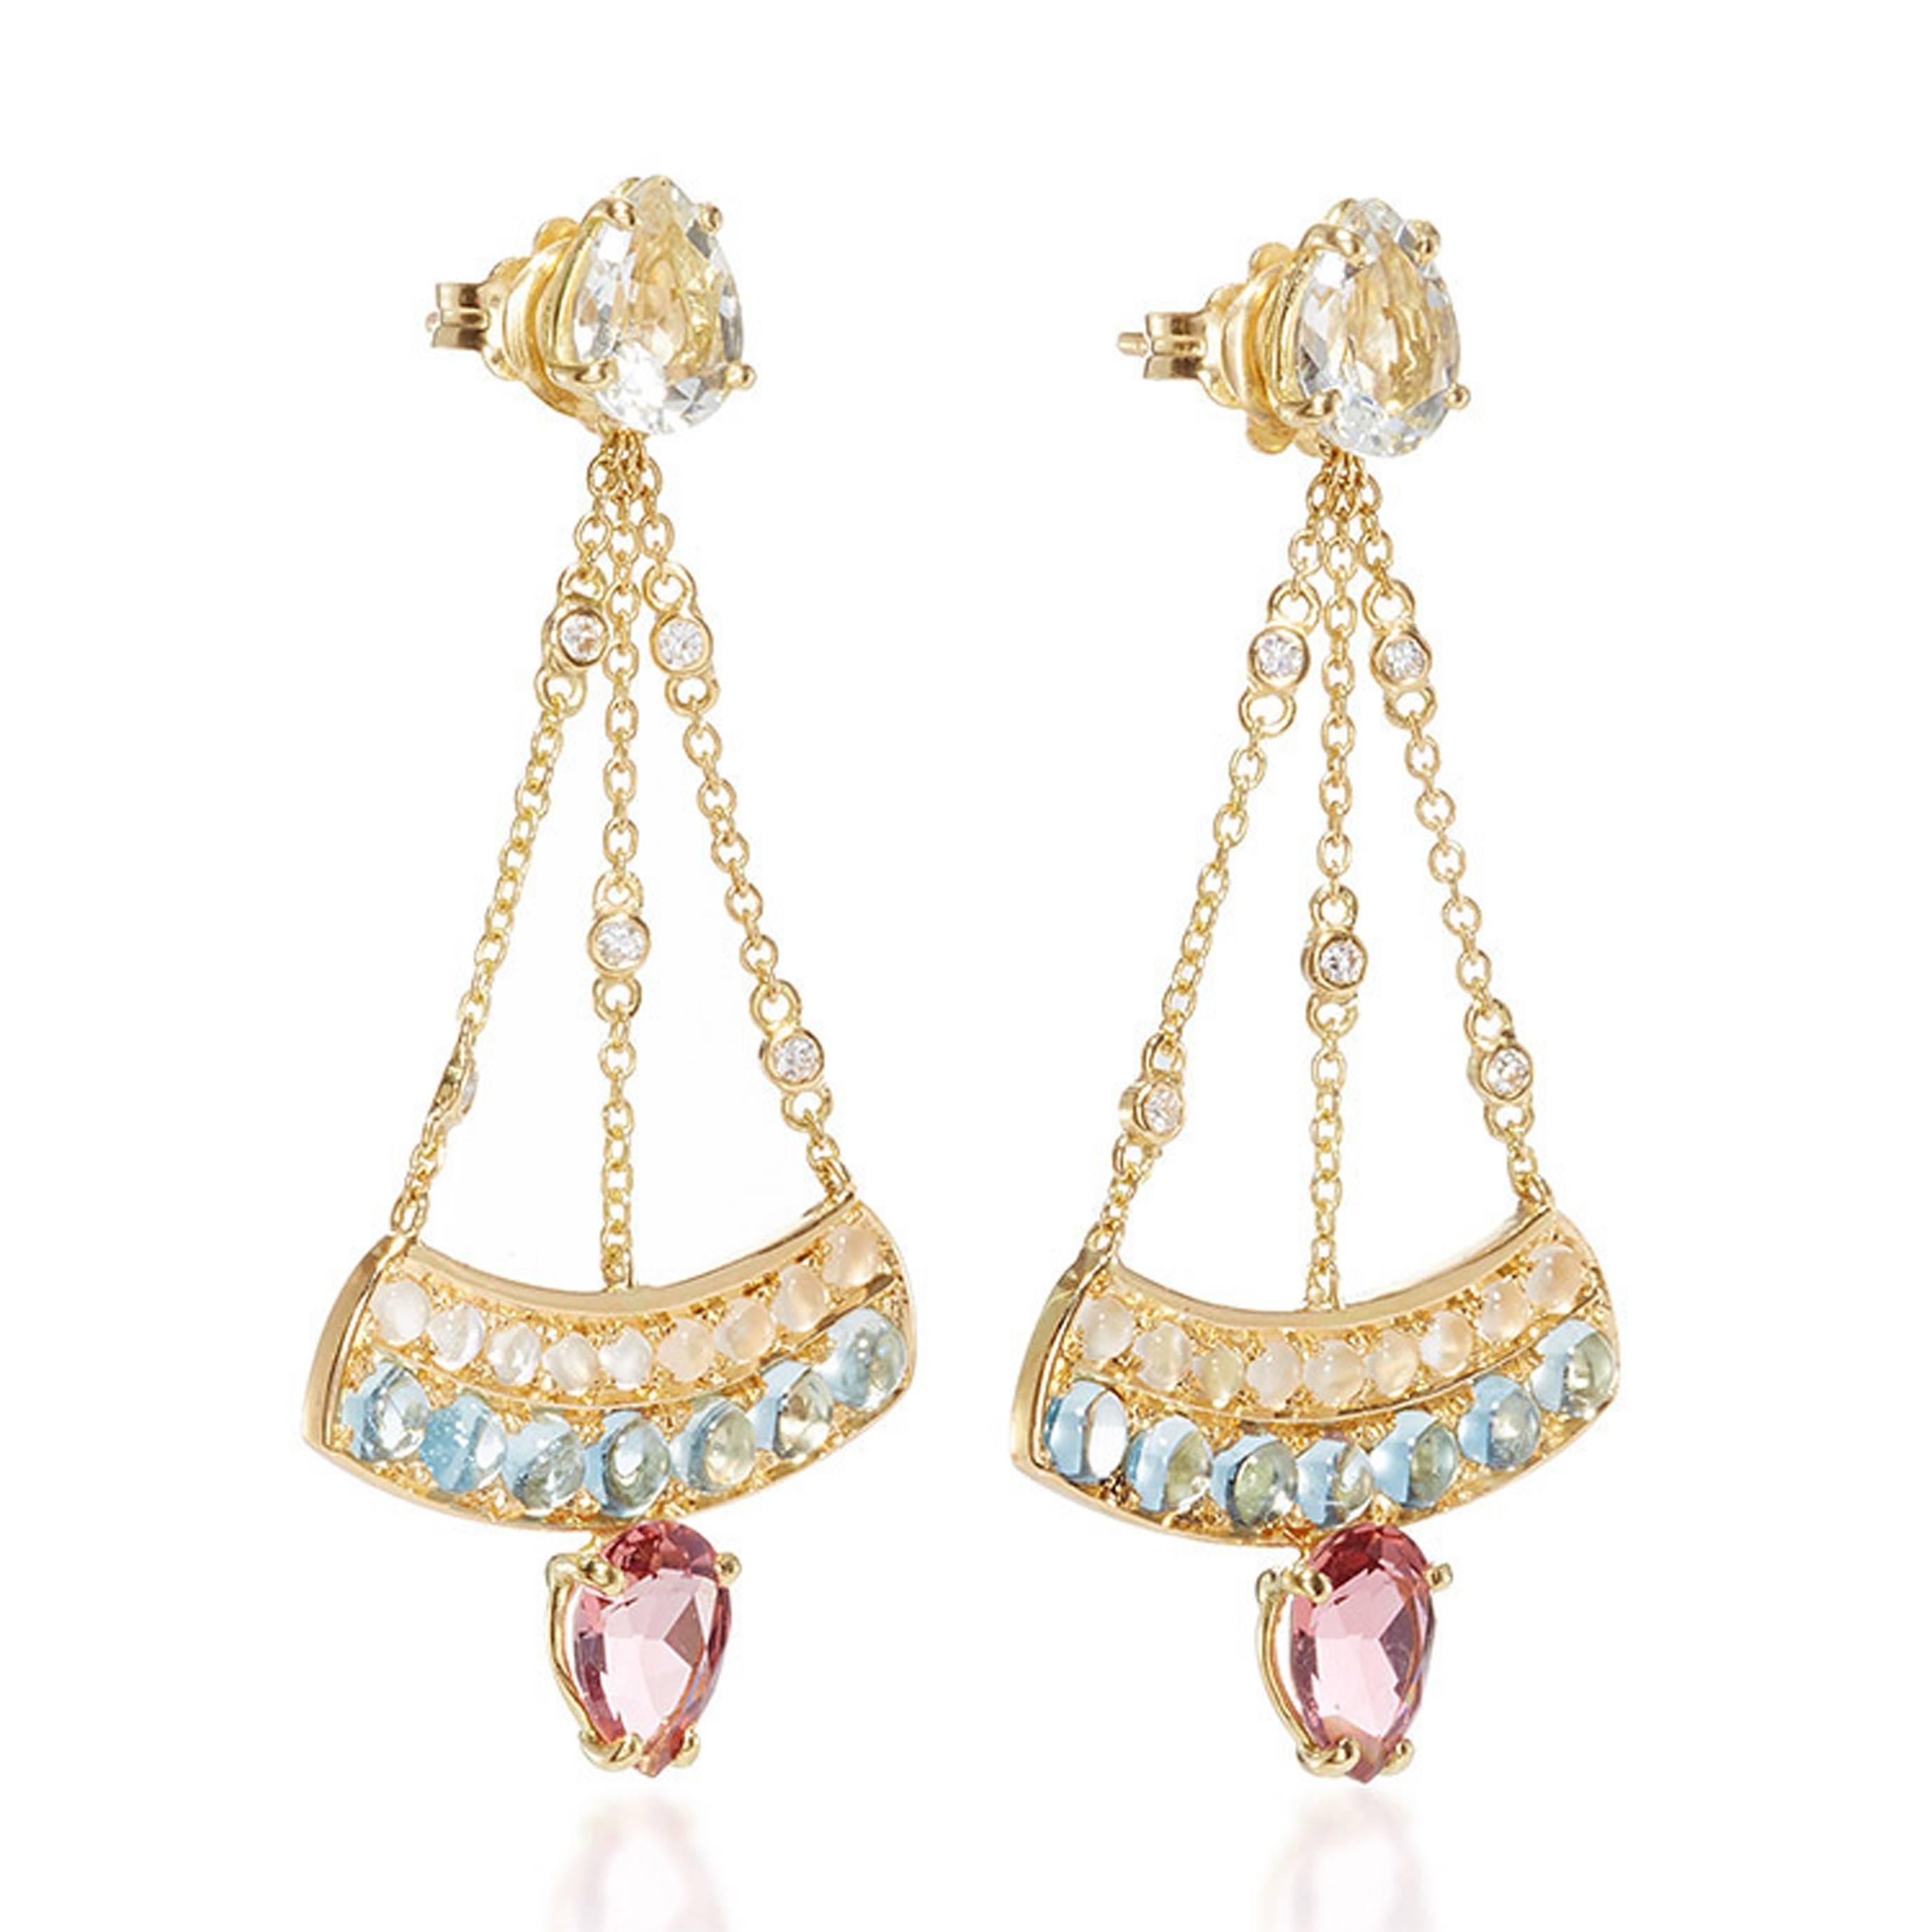 These DUBINI earrings from the 'Theodora' collection feature white topaz and rubellite drops with aquamarine, moonstone cabochons with diamonds set in 18K yellow gold.

…………………………………………………………………………………………………………………………………………………………………….

Inspired by